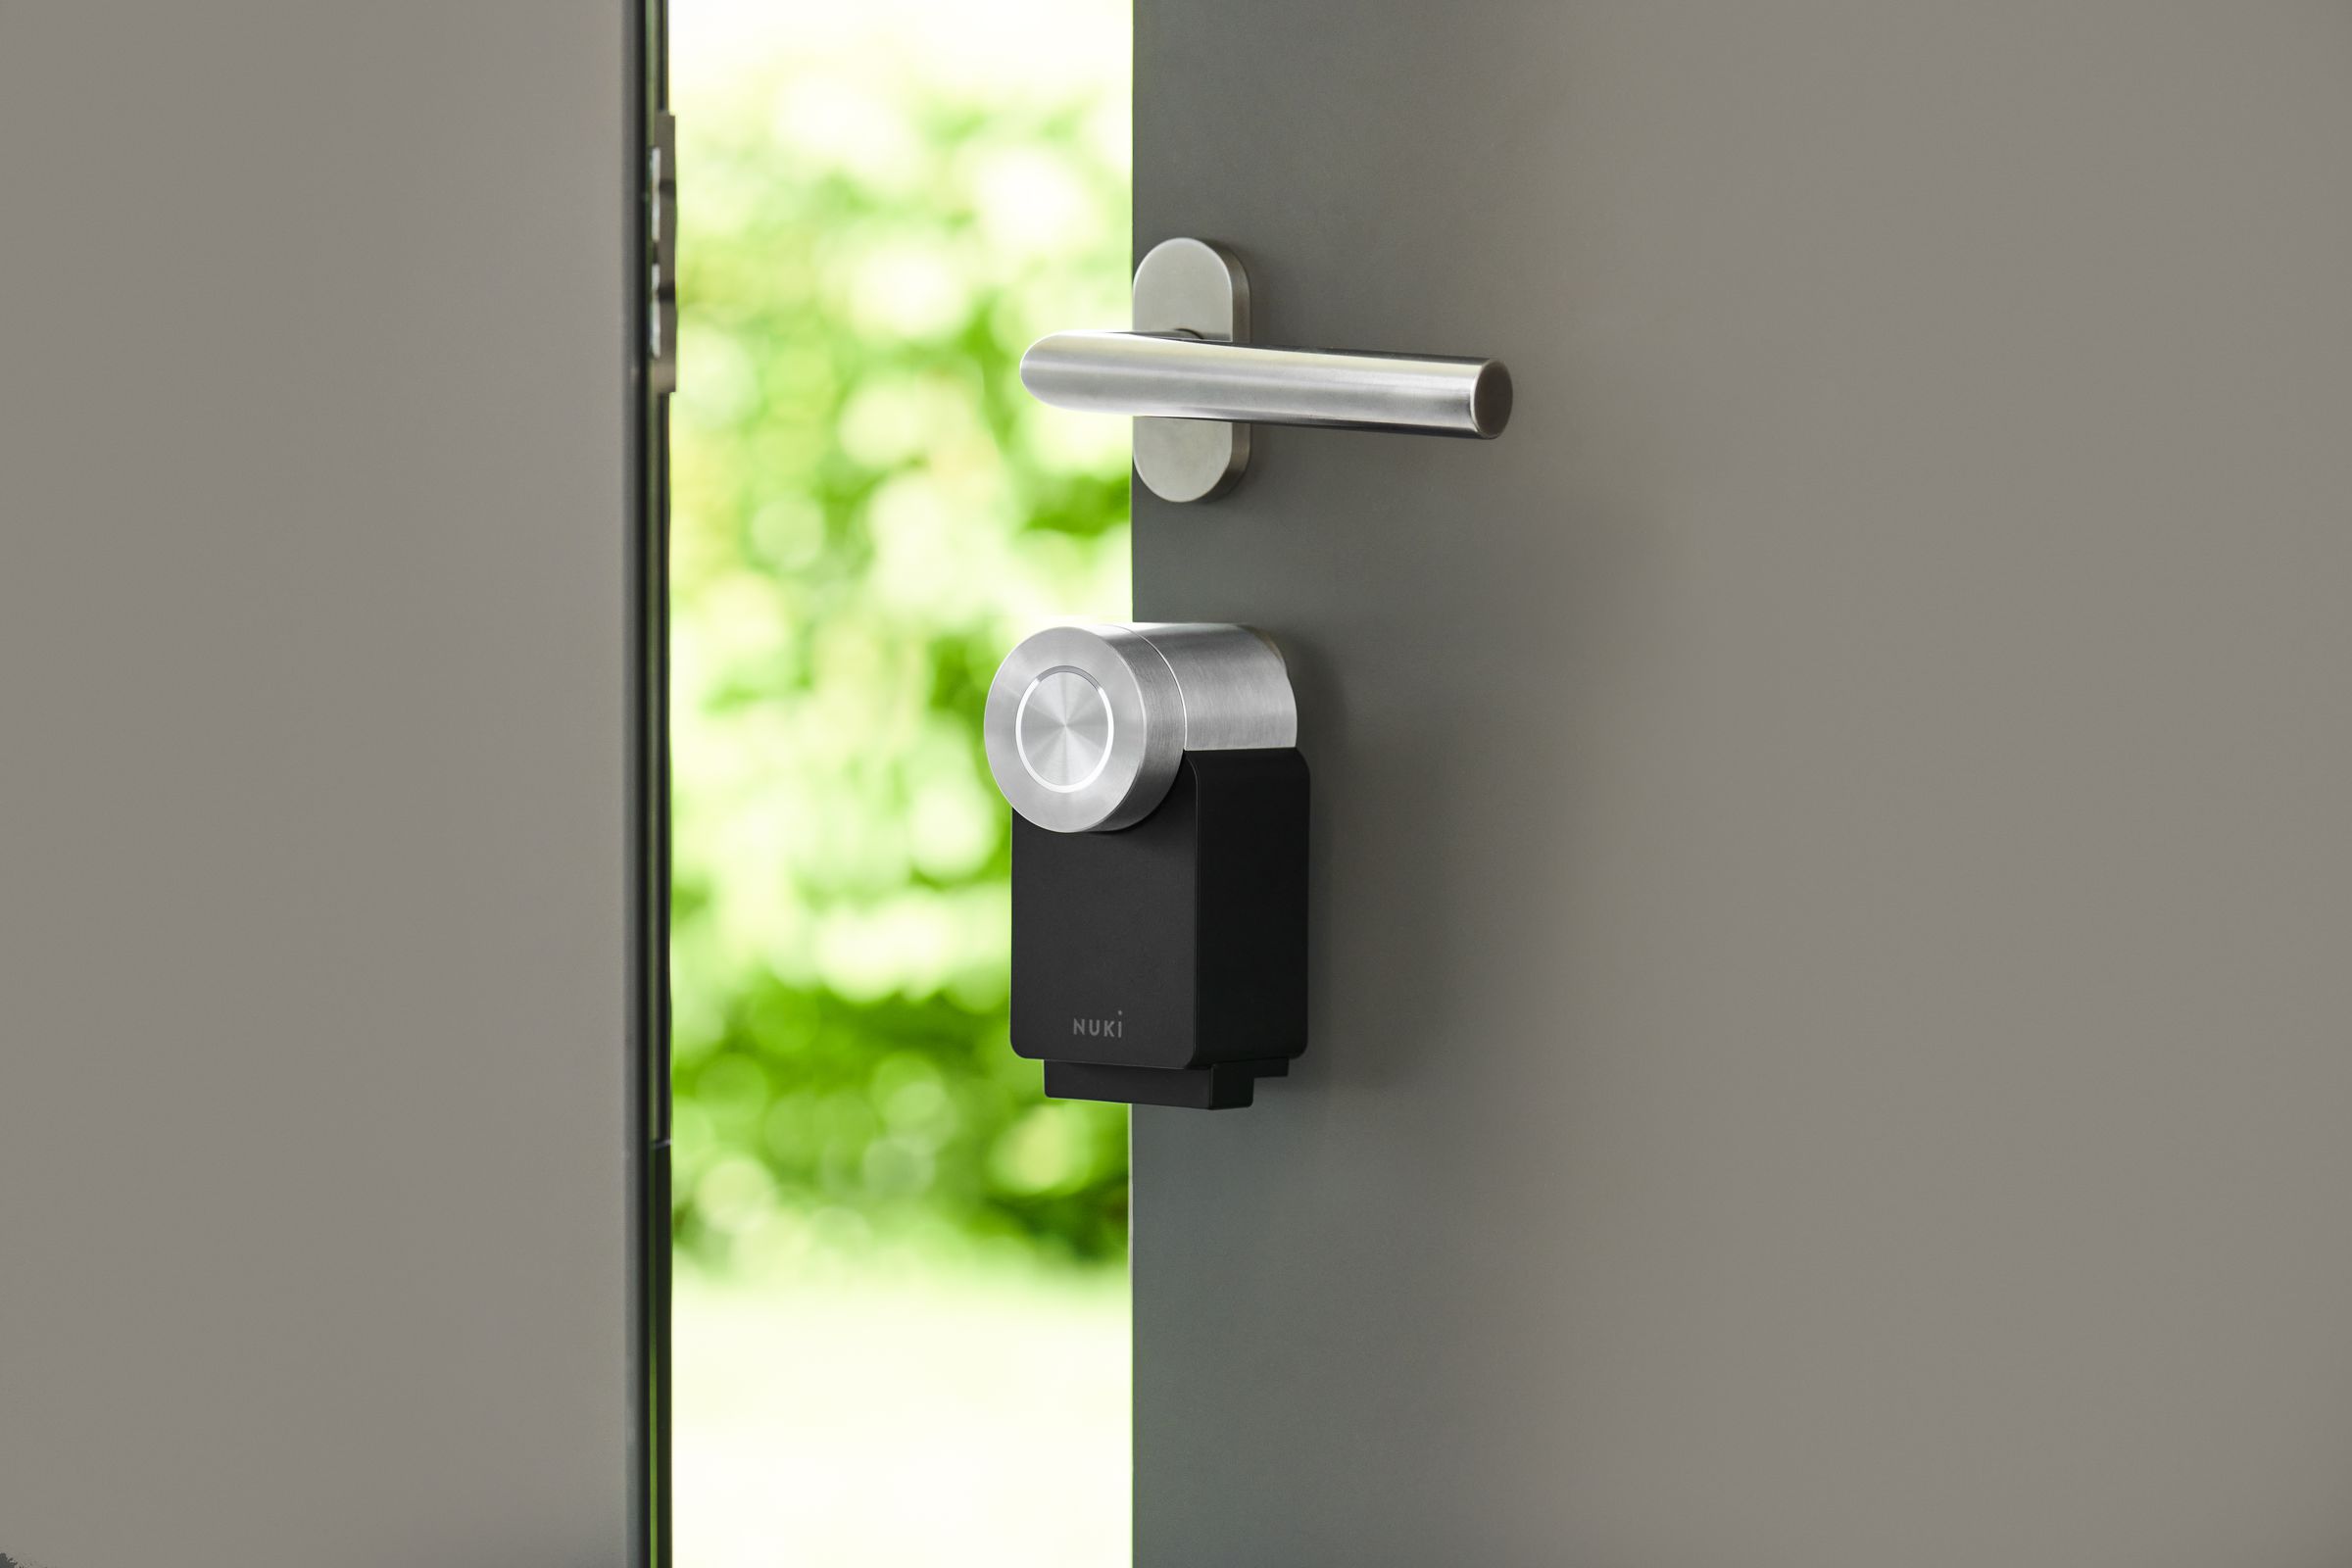 European smart lock maker Nuki was instrumental in adding the “unlock without pulling the latch” feature to the Matter spec.